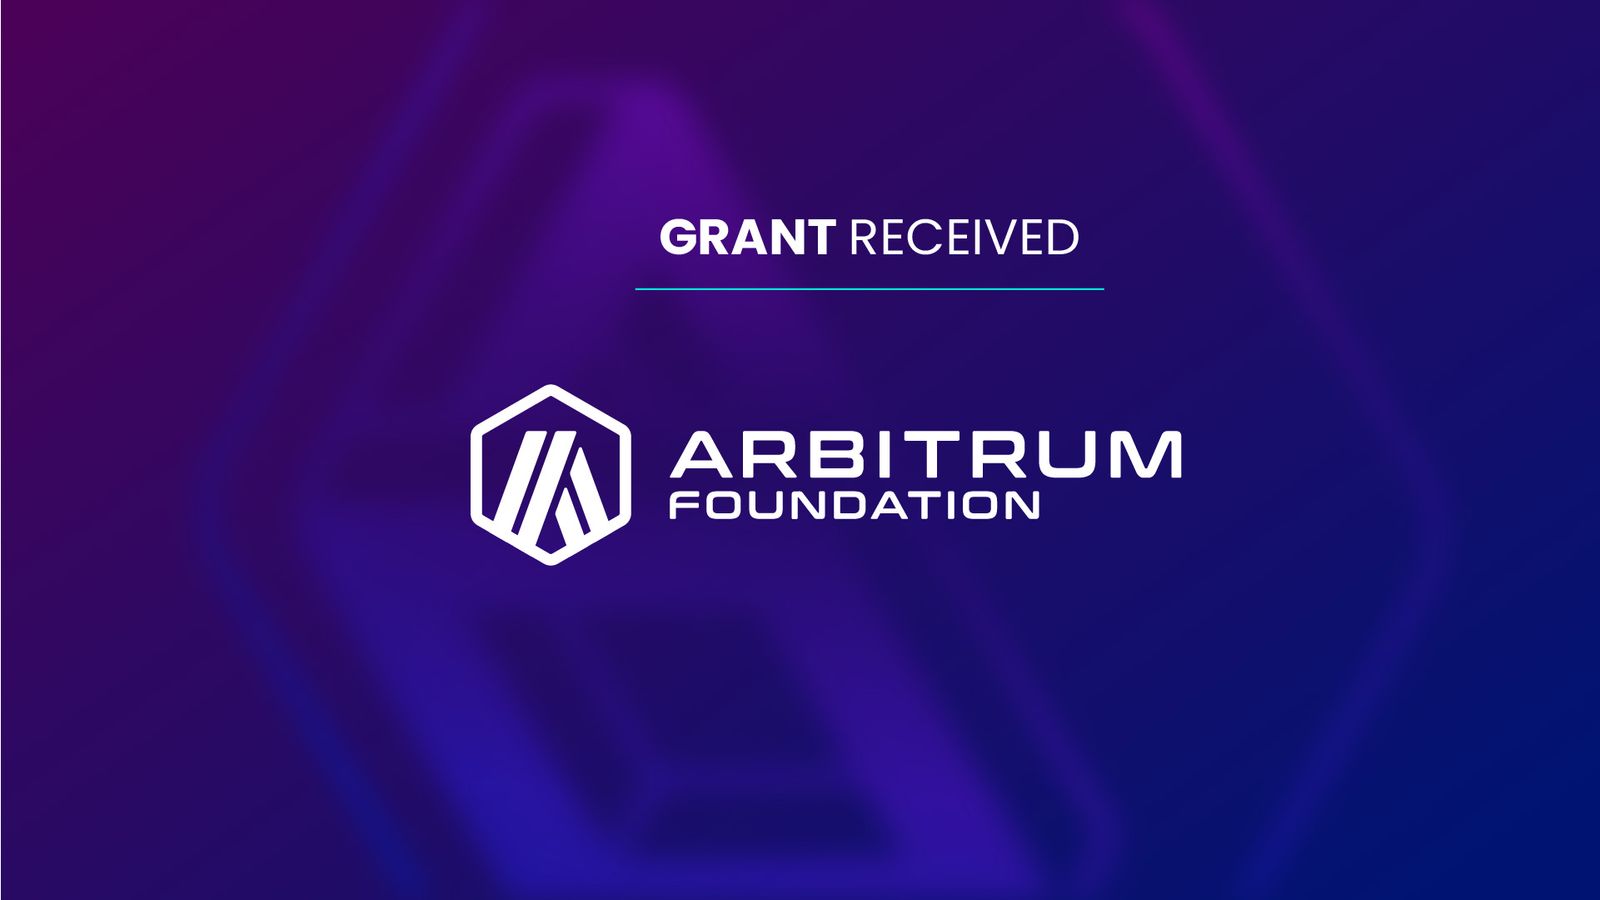 DLC.Link Receives Grant from the Arbitrum Foundation